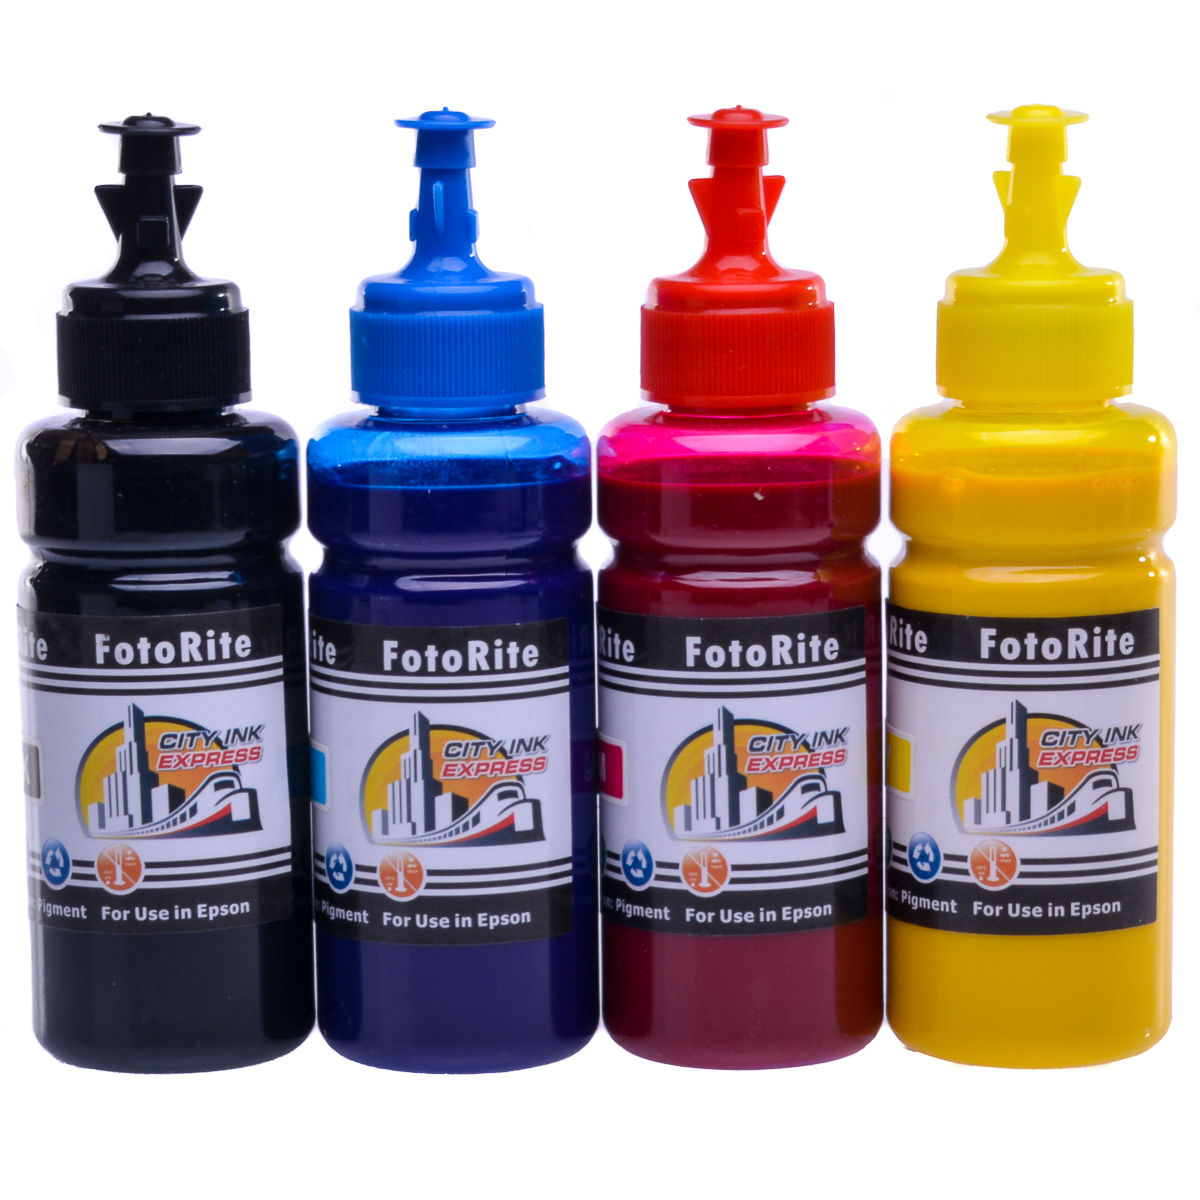 Cheap Multipack pigment ink refill replaces Epson ET-5170